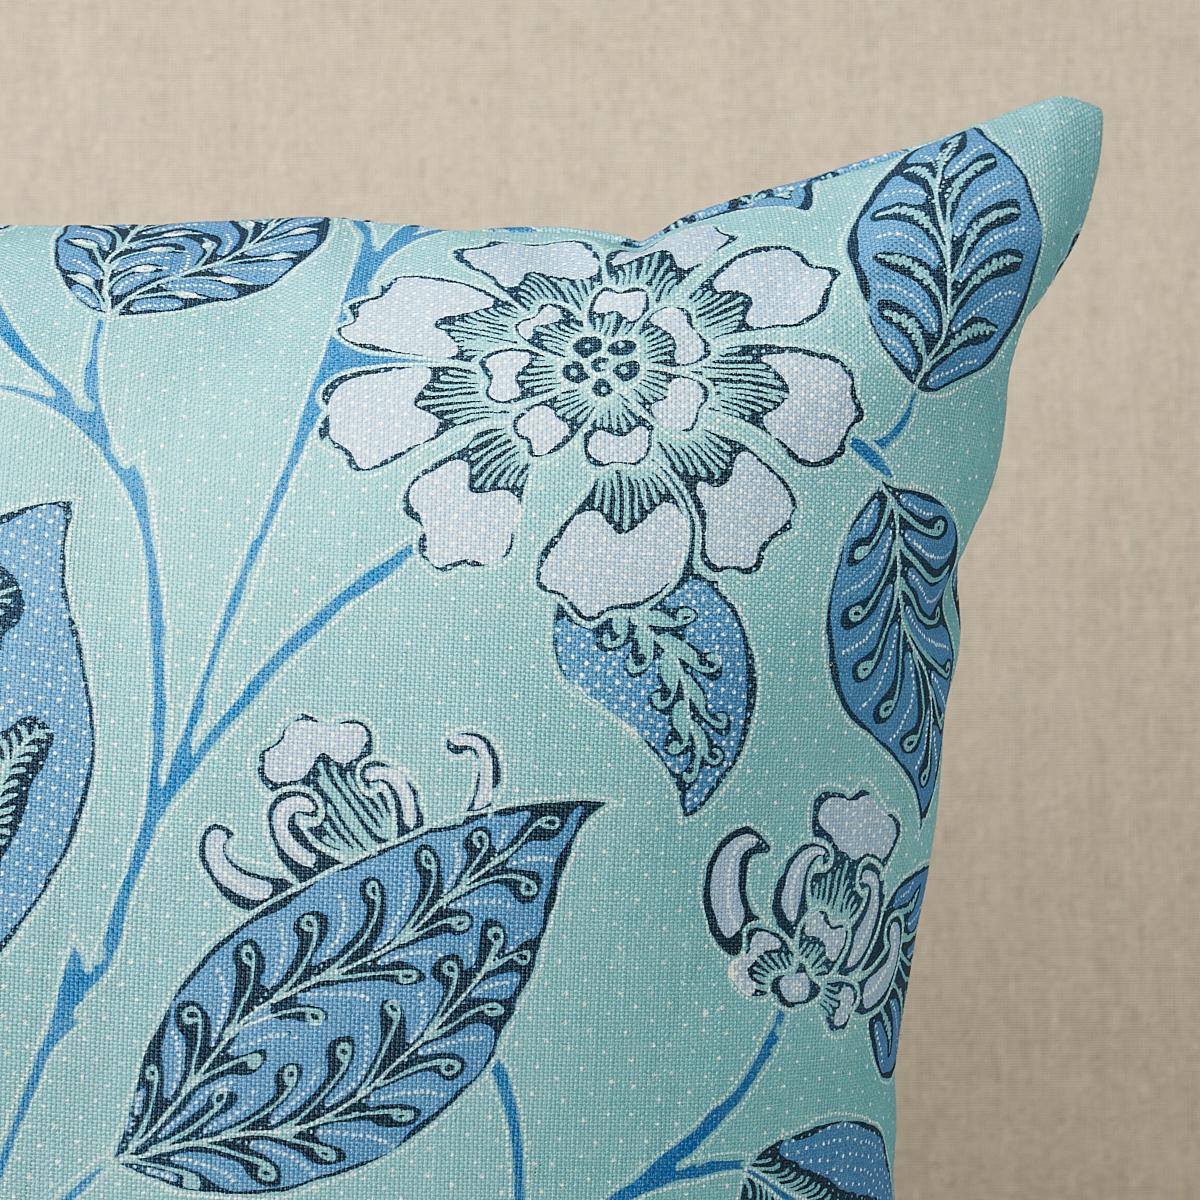 This pillow features Kava Cay Indoor/Outdoor with a knife edge finish. A loose, leafy floral inspired by a vintage batik, Kava Cay Indoor/Outdoor in blues is a beautifully detailed mid-scale pattern with the look of a traditional resist-dyed